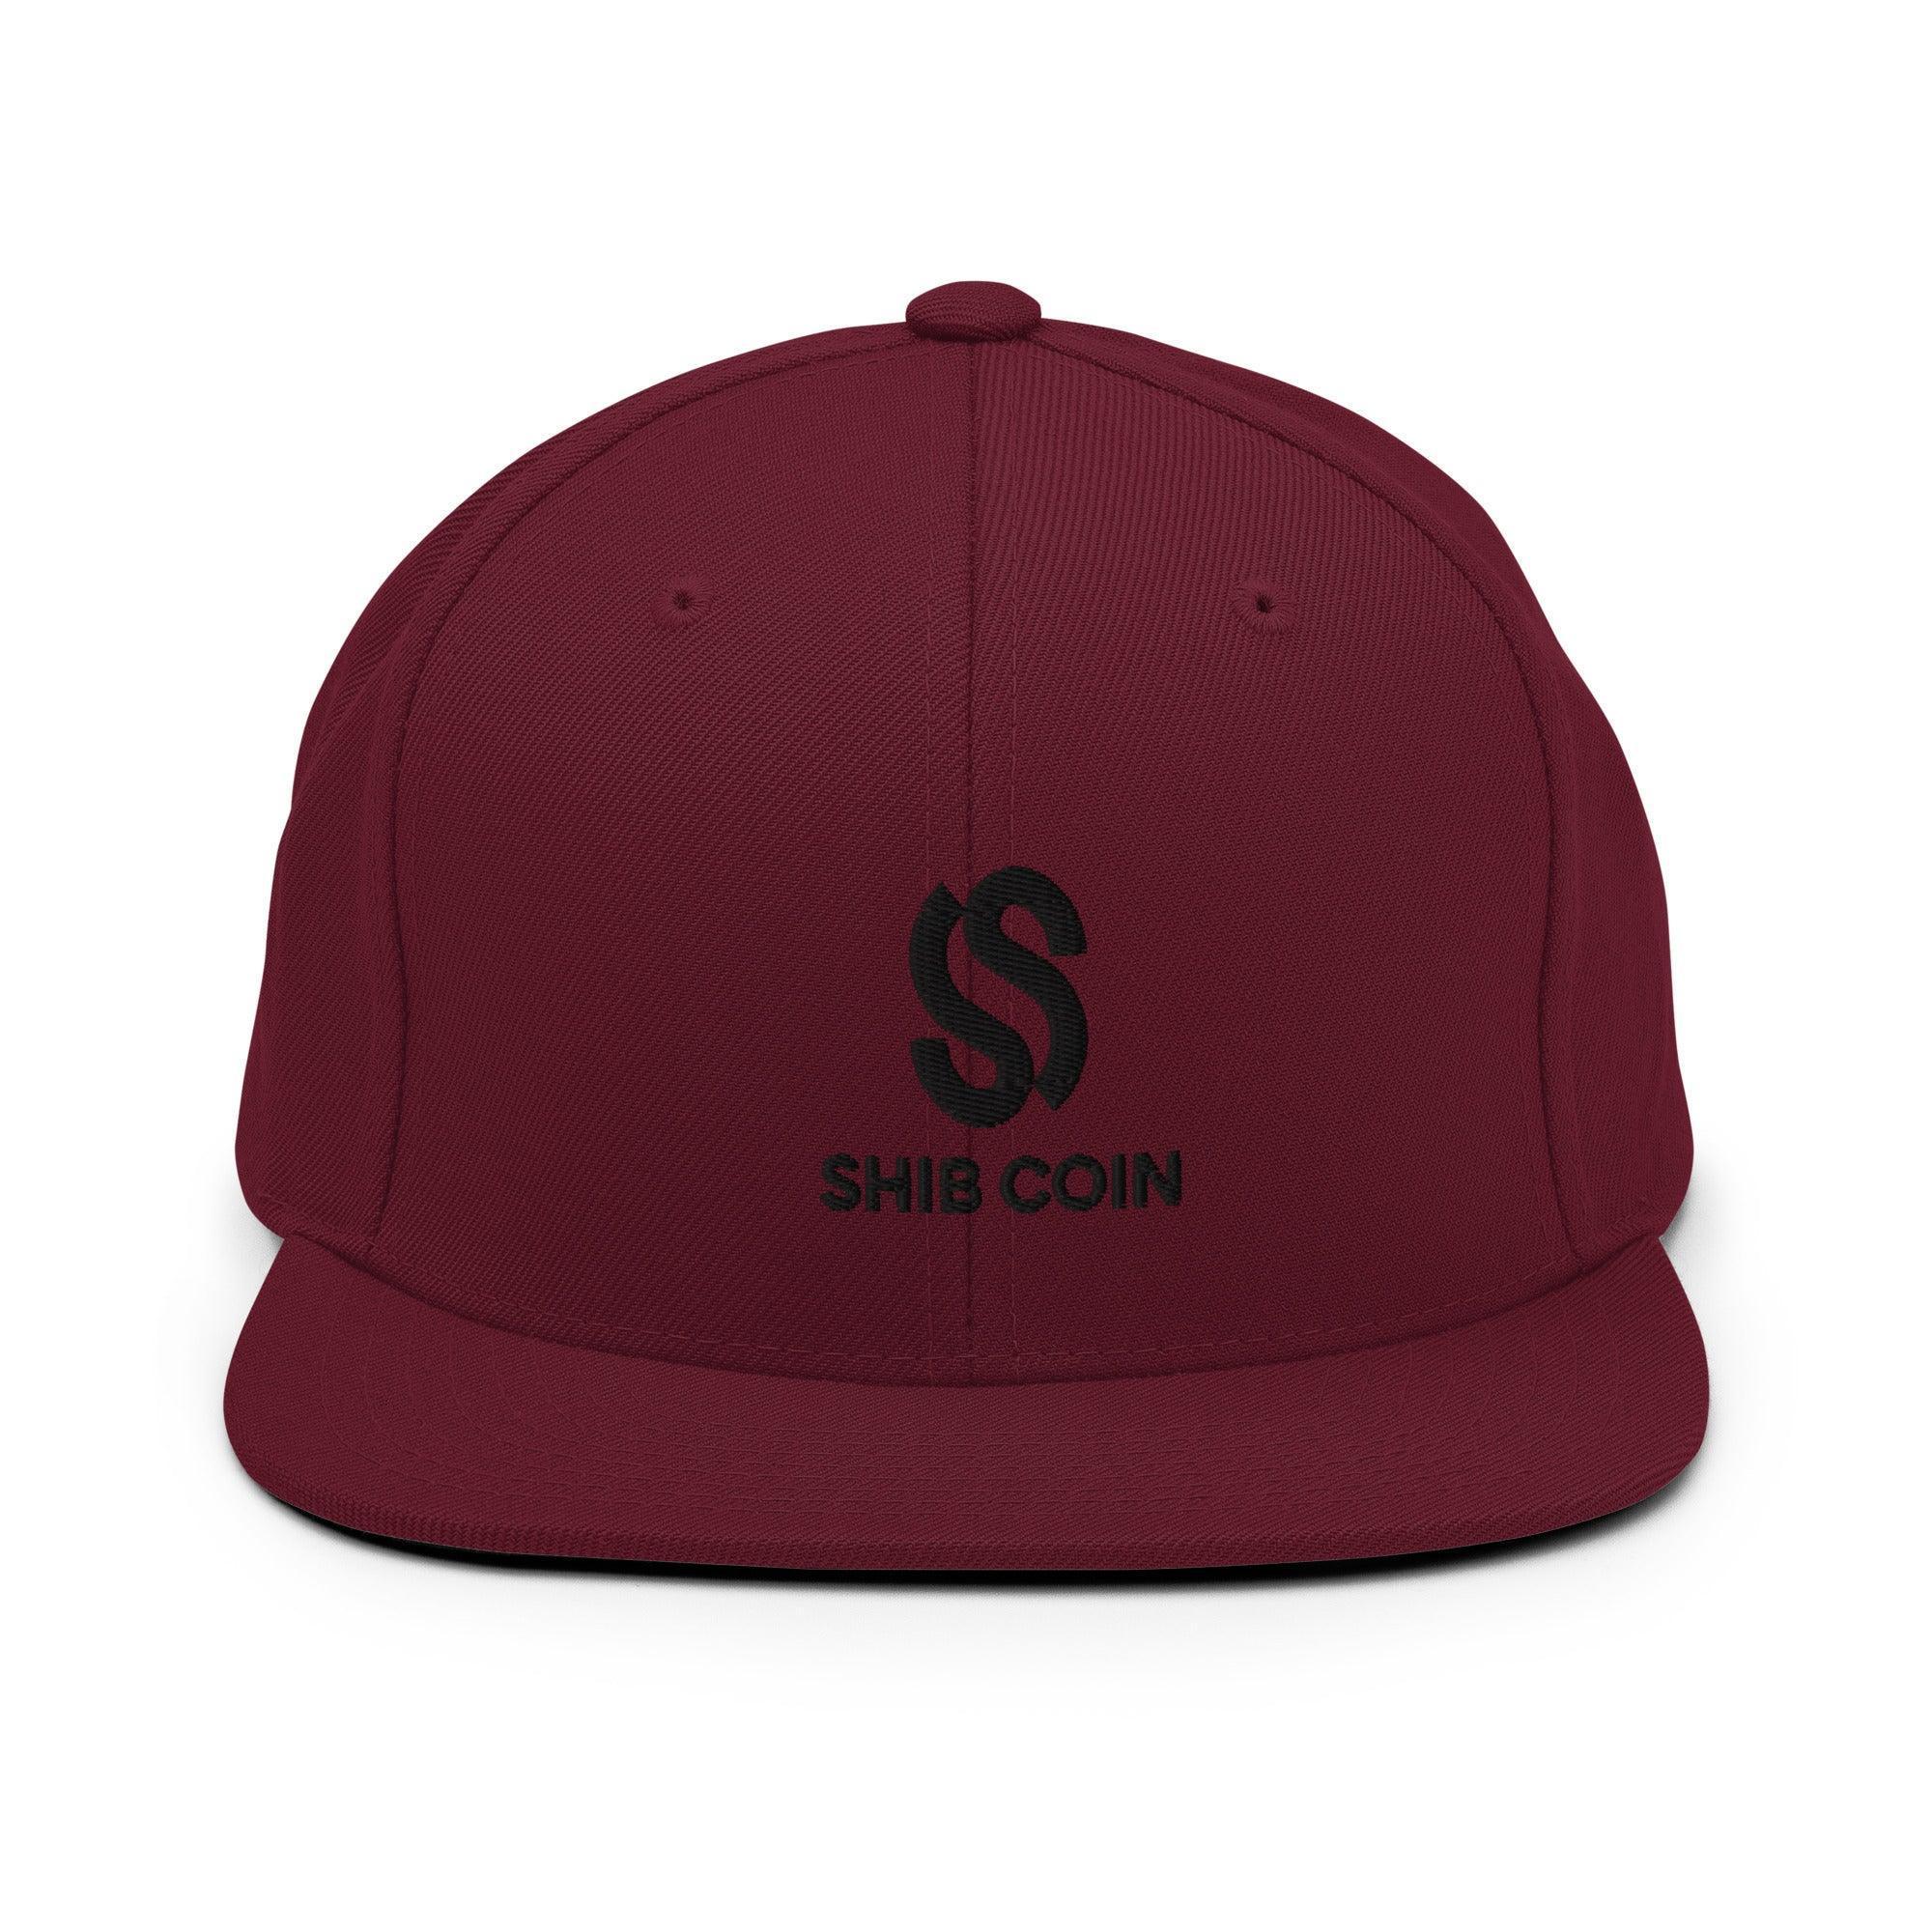 Shib Inu Coin Snapback Hat - InvestmenTees